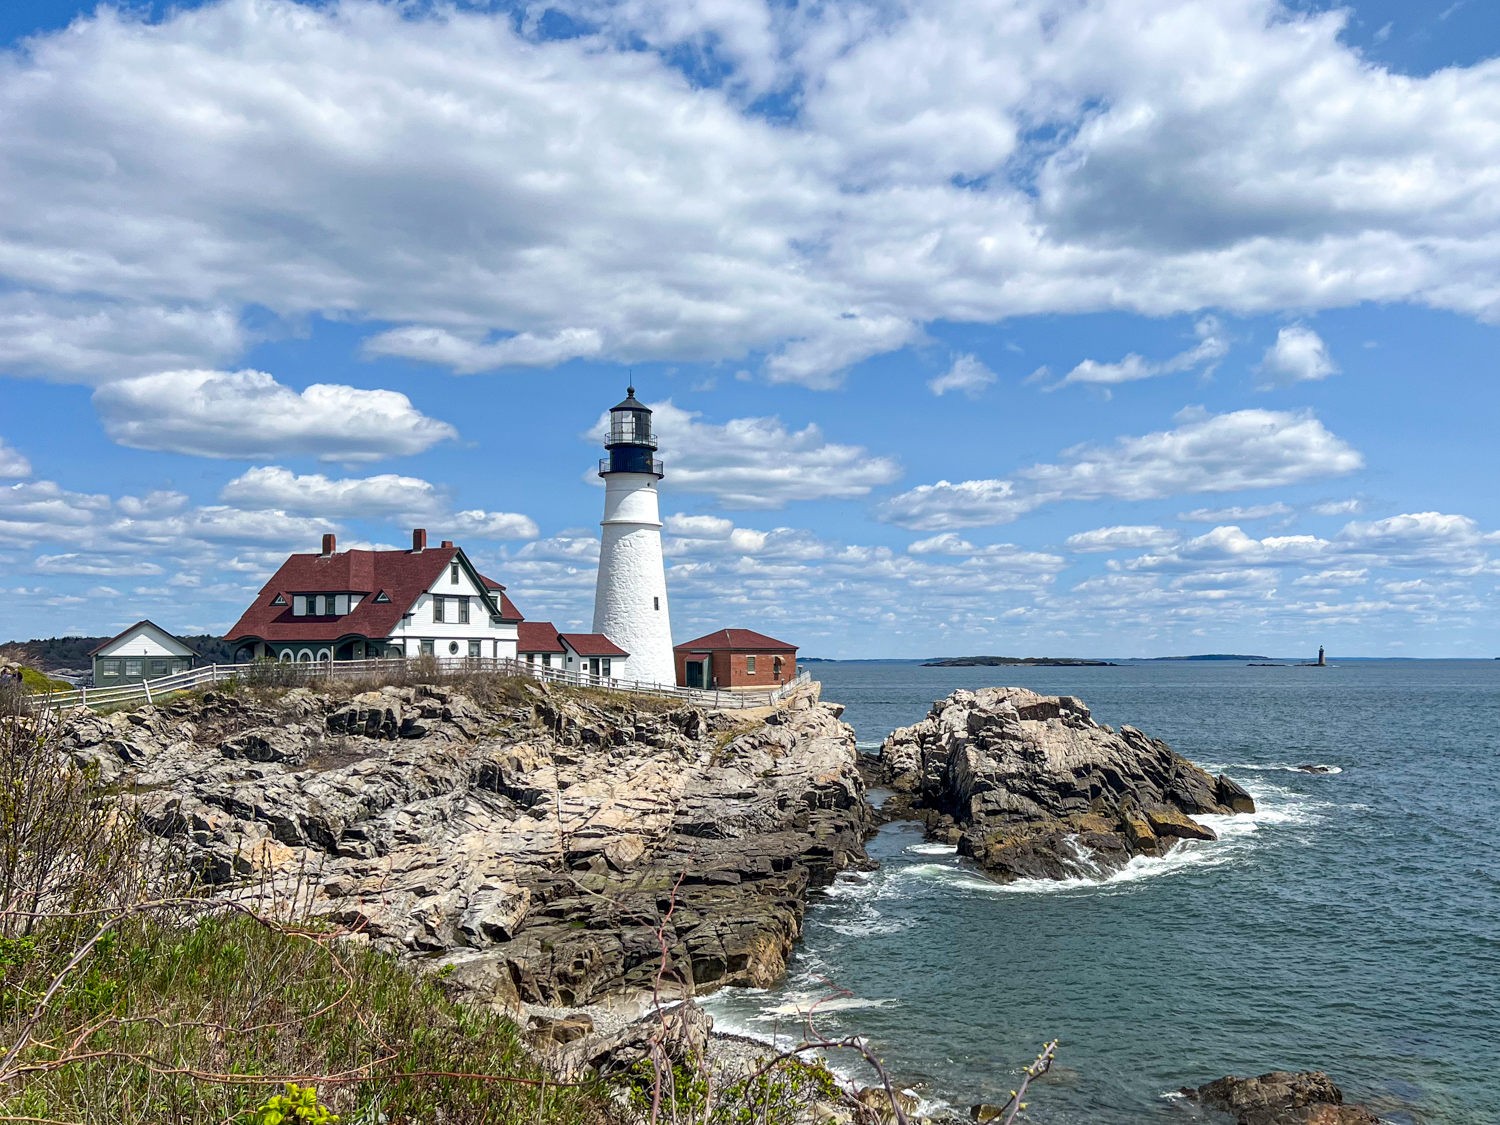 Portland Head Light is the most photographed of Maine's lighthouses